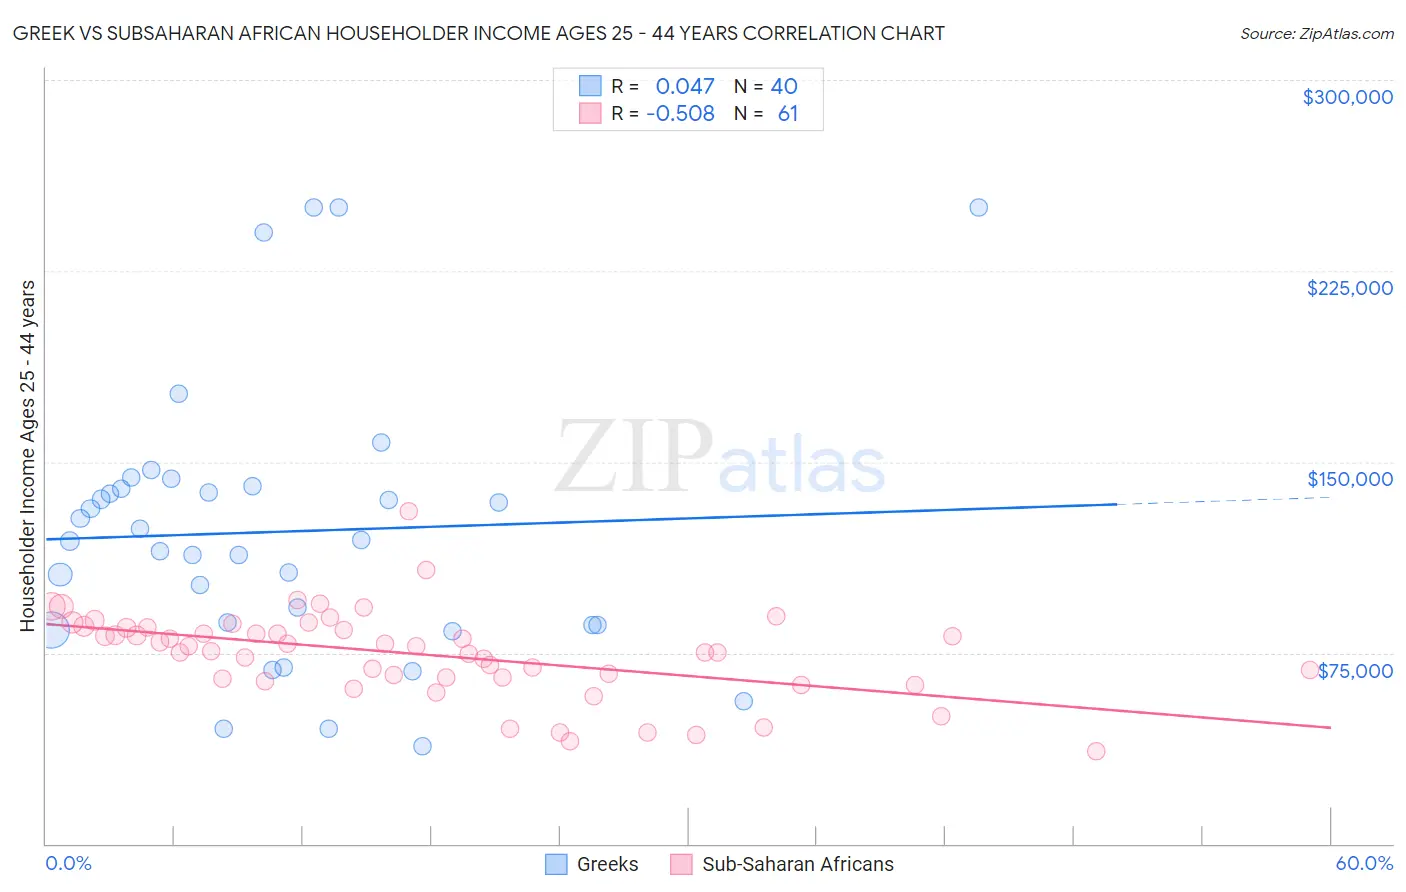 Greek vs Subsaharan African Householder Income Ages 25 - 44 years